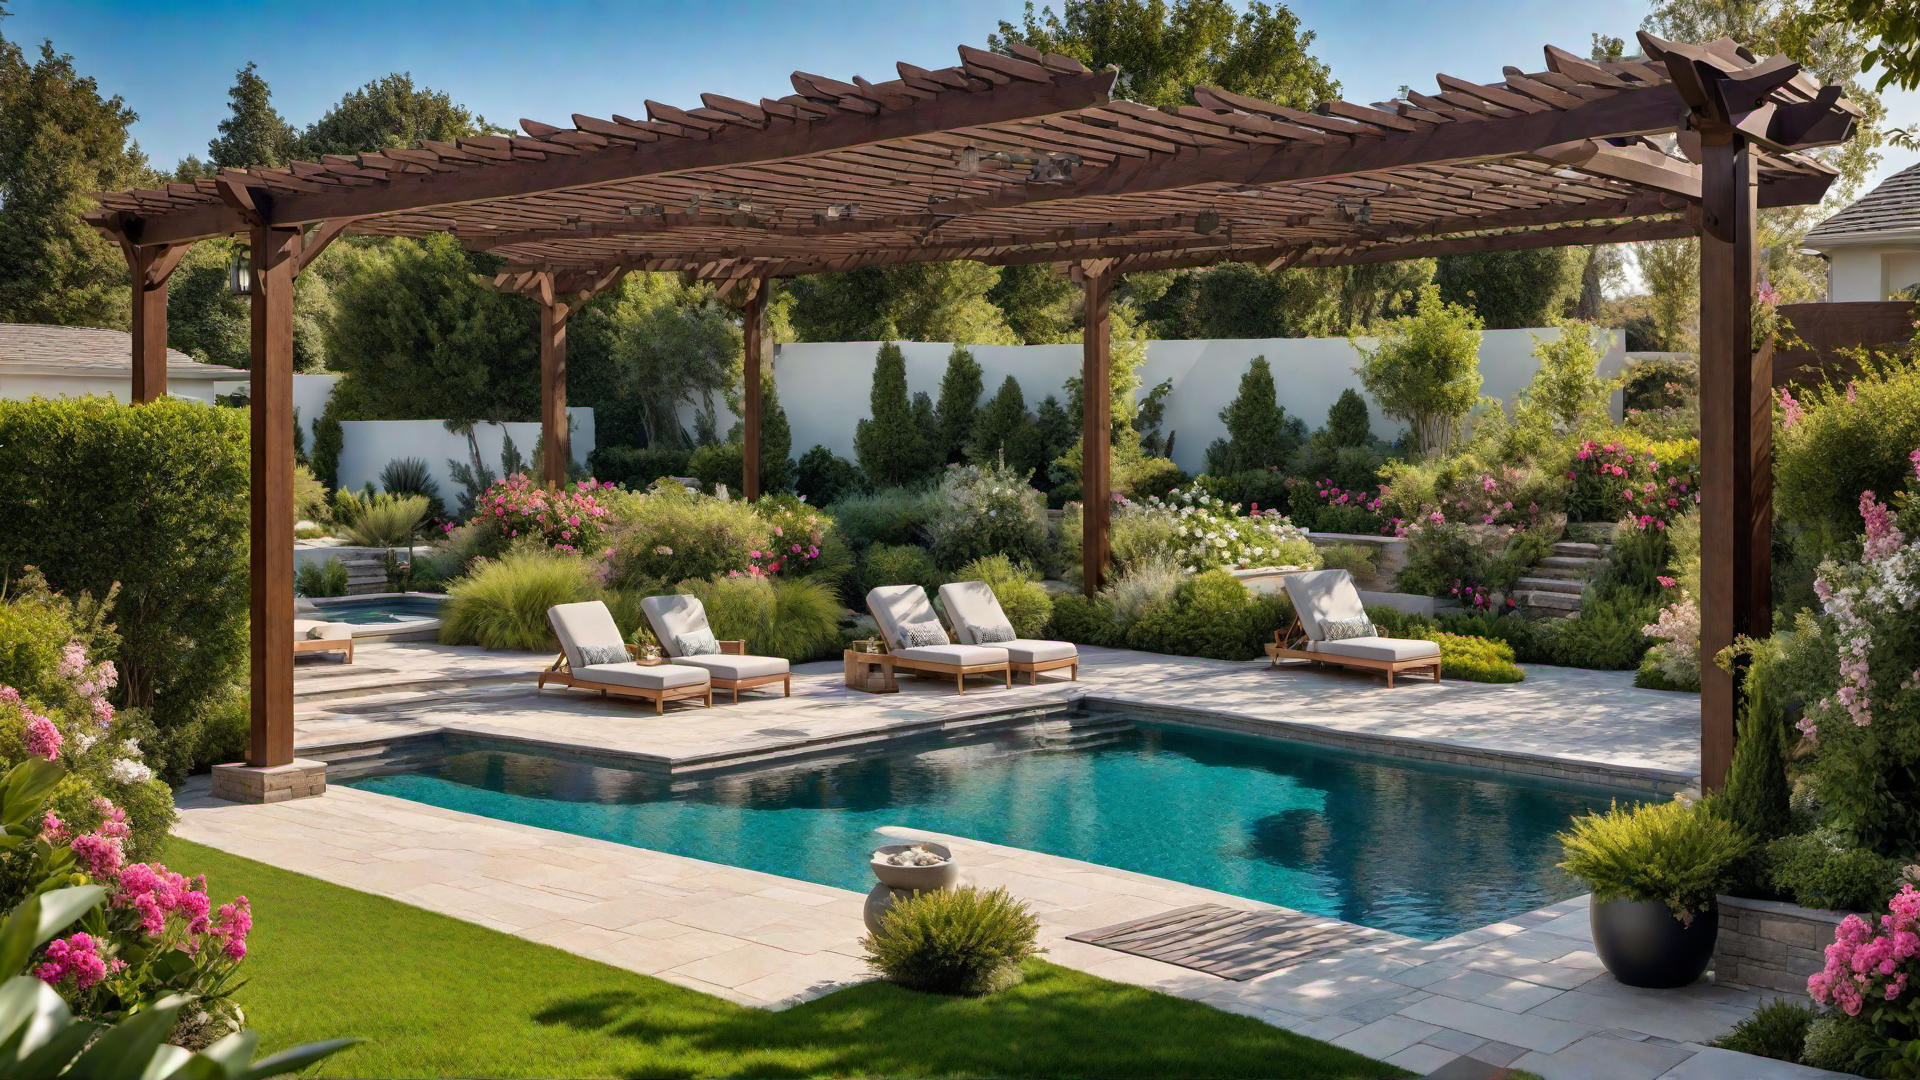 Pool with Surrounding Pergola for Shade